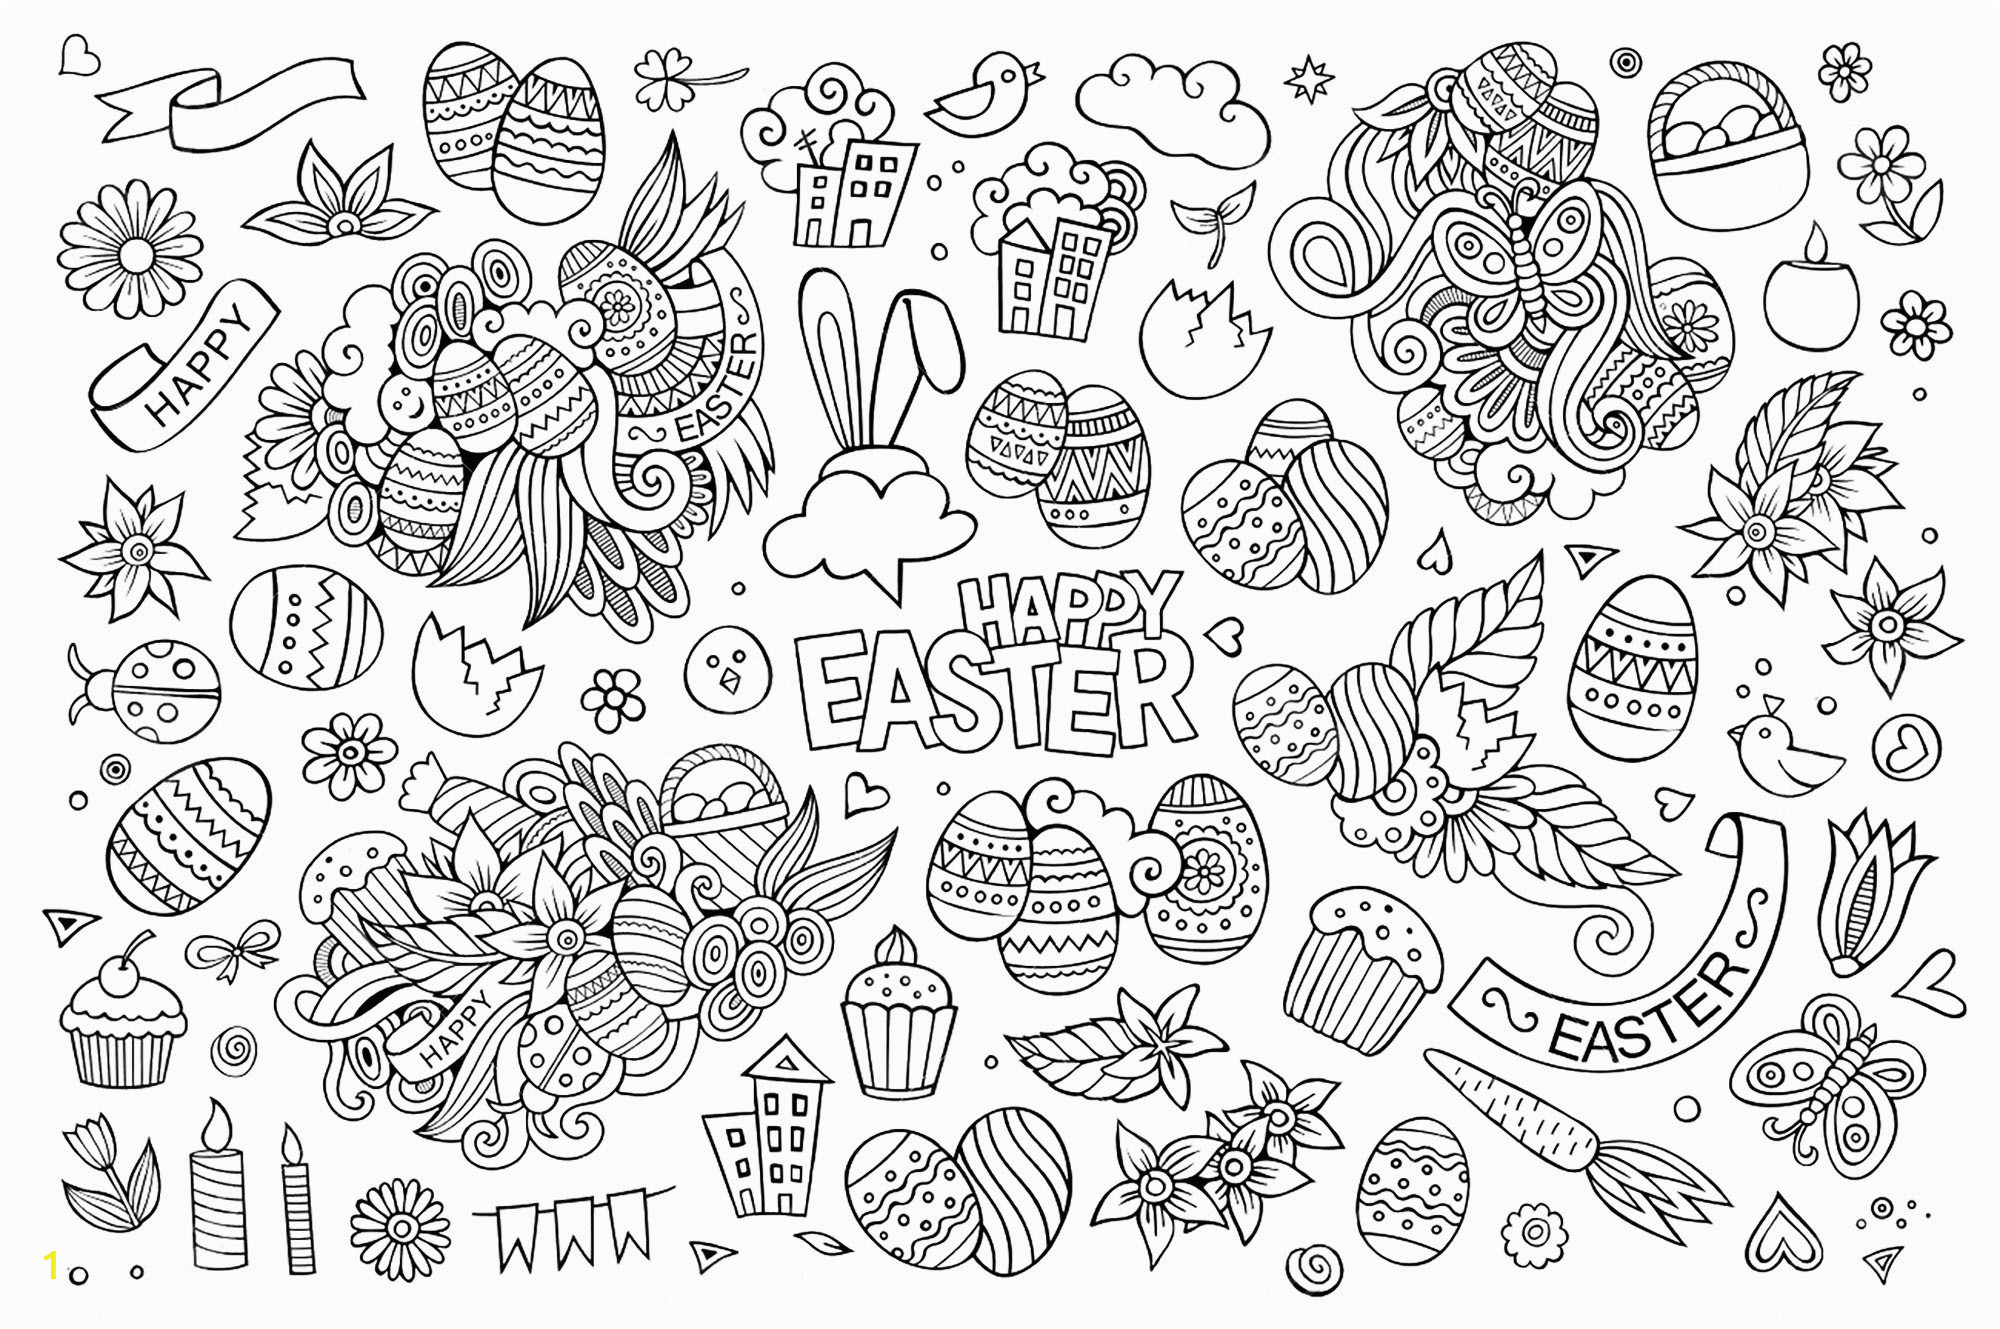 easterlt coloring egg hunt pages unique simple doodle ideas happy easter day pages